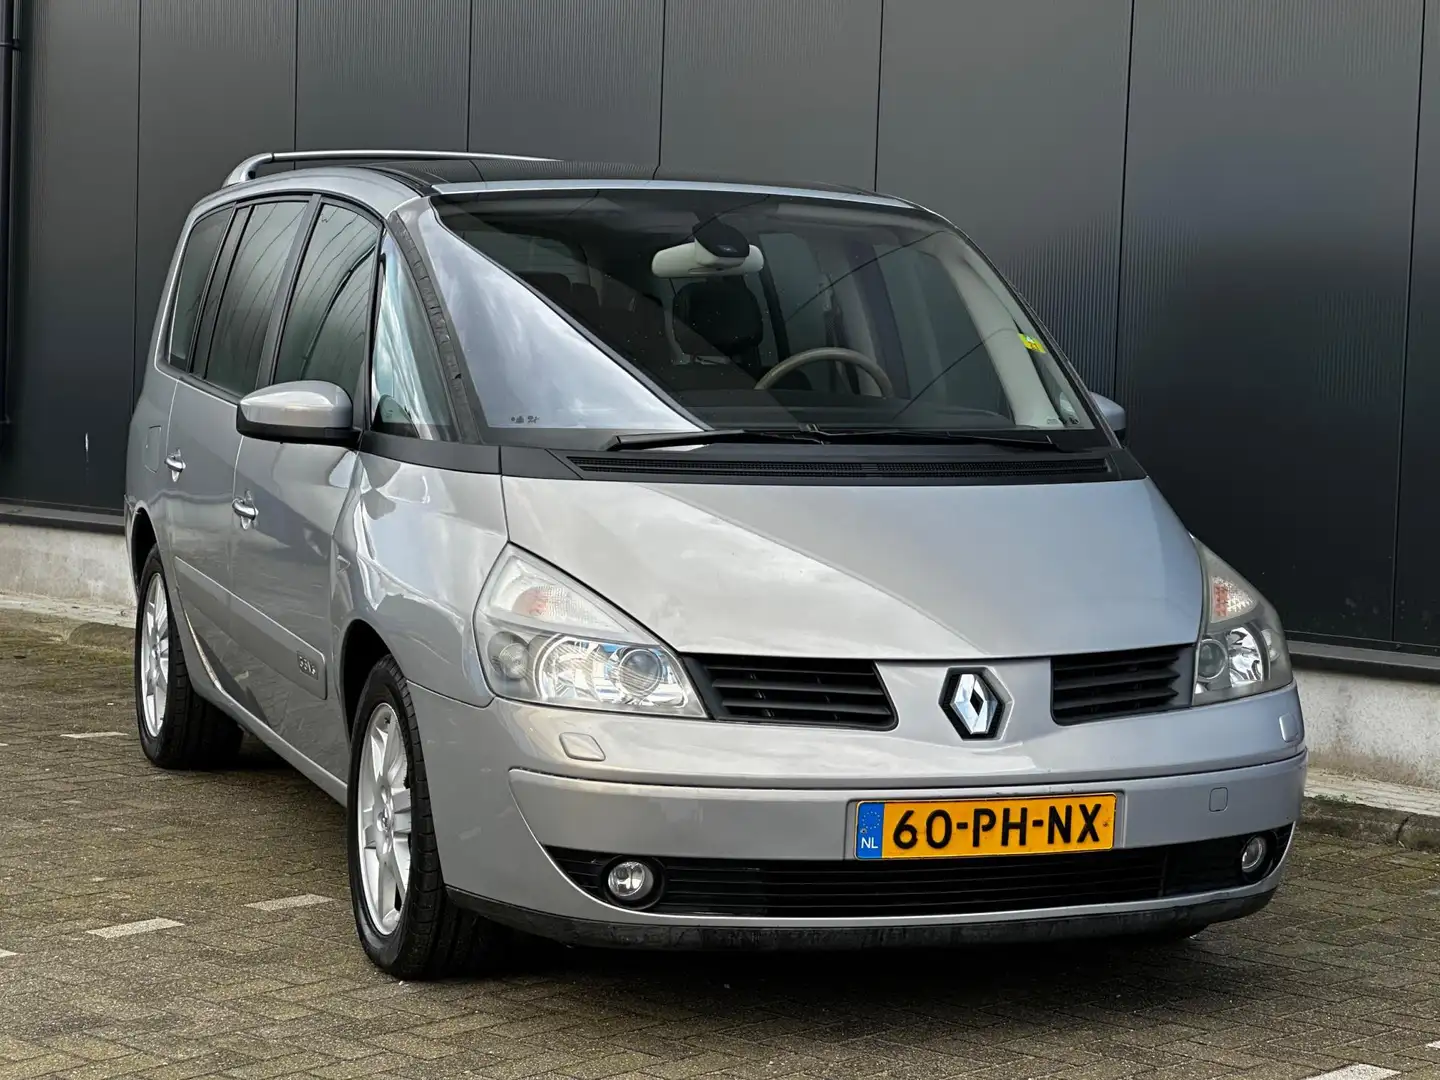 Renault Grand Espace 3.5 V6 Initiale AUTOMAAT 6-PERSOONS NAVI/MEMORY/PA Beige - 2